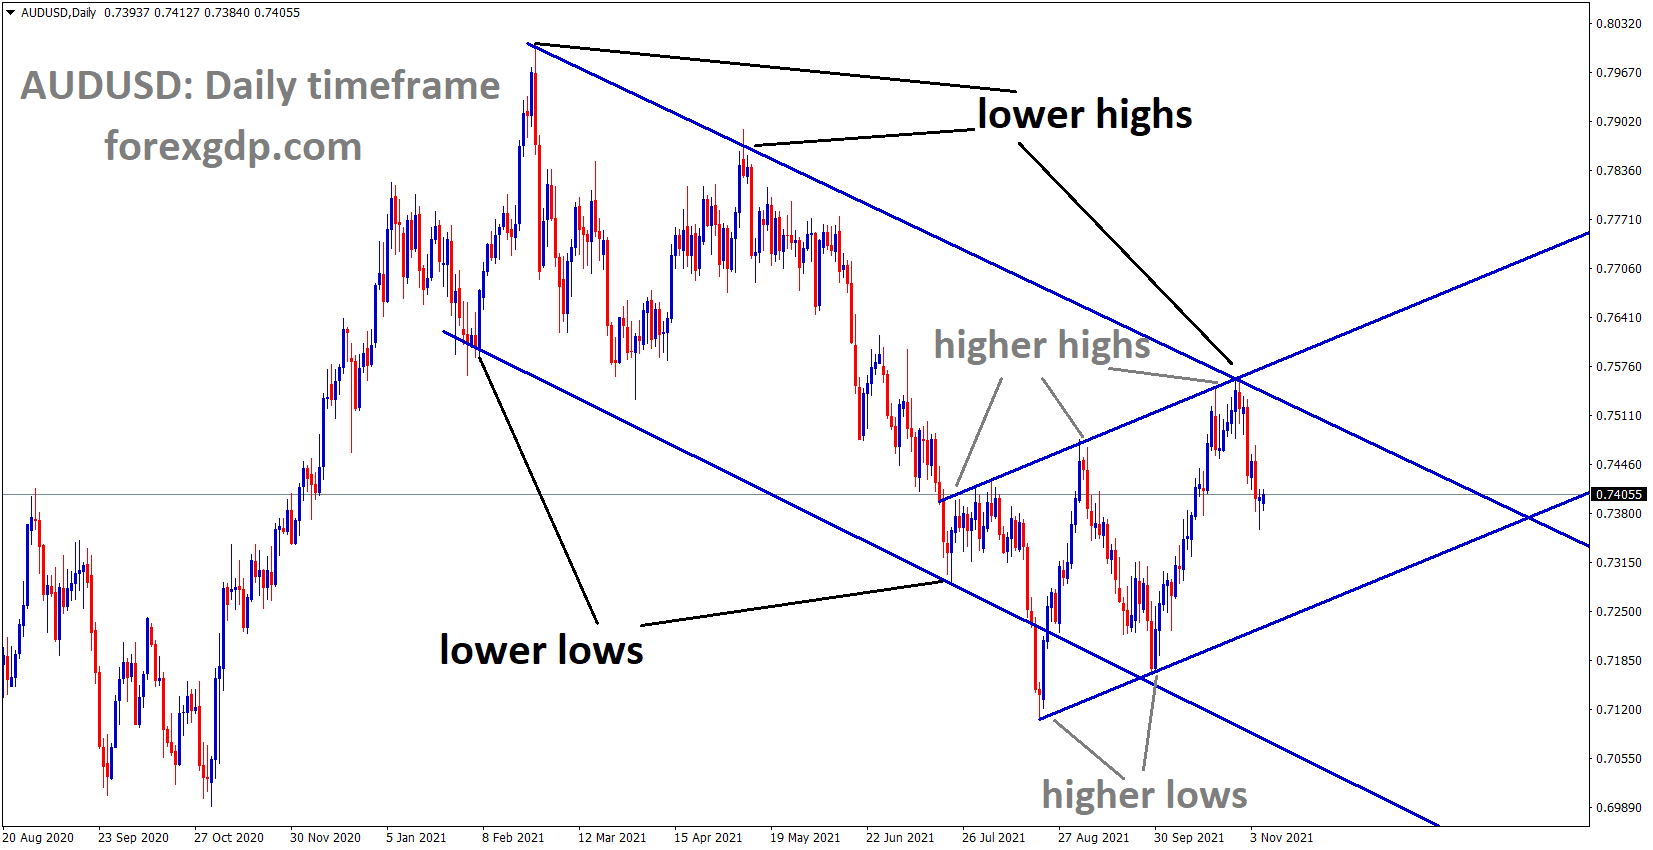 AUDUSD is moving in the Descending channel and fell from the lower high area